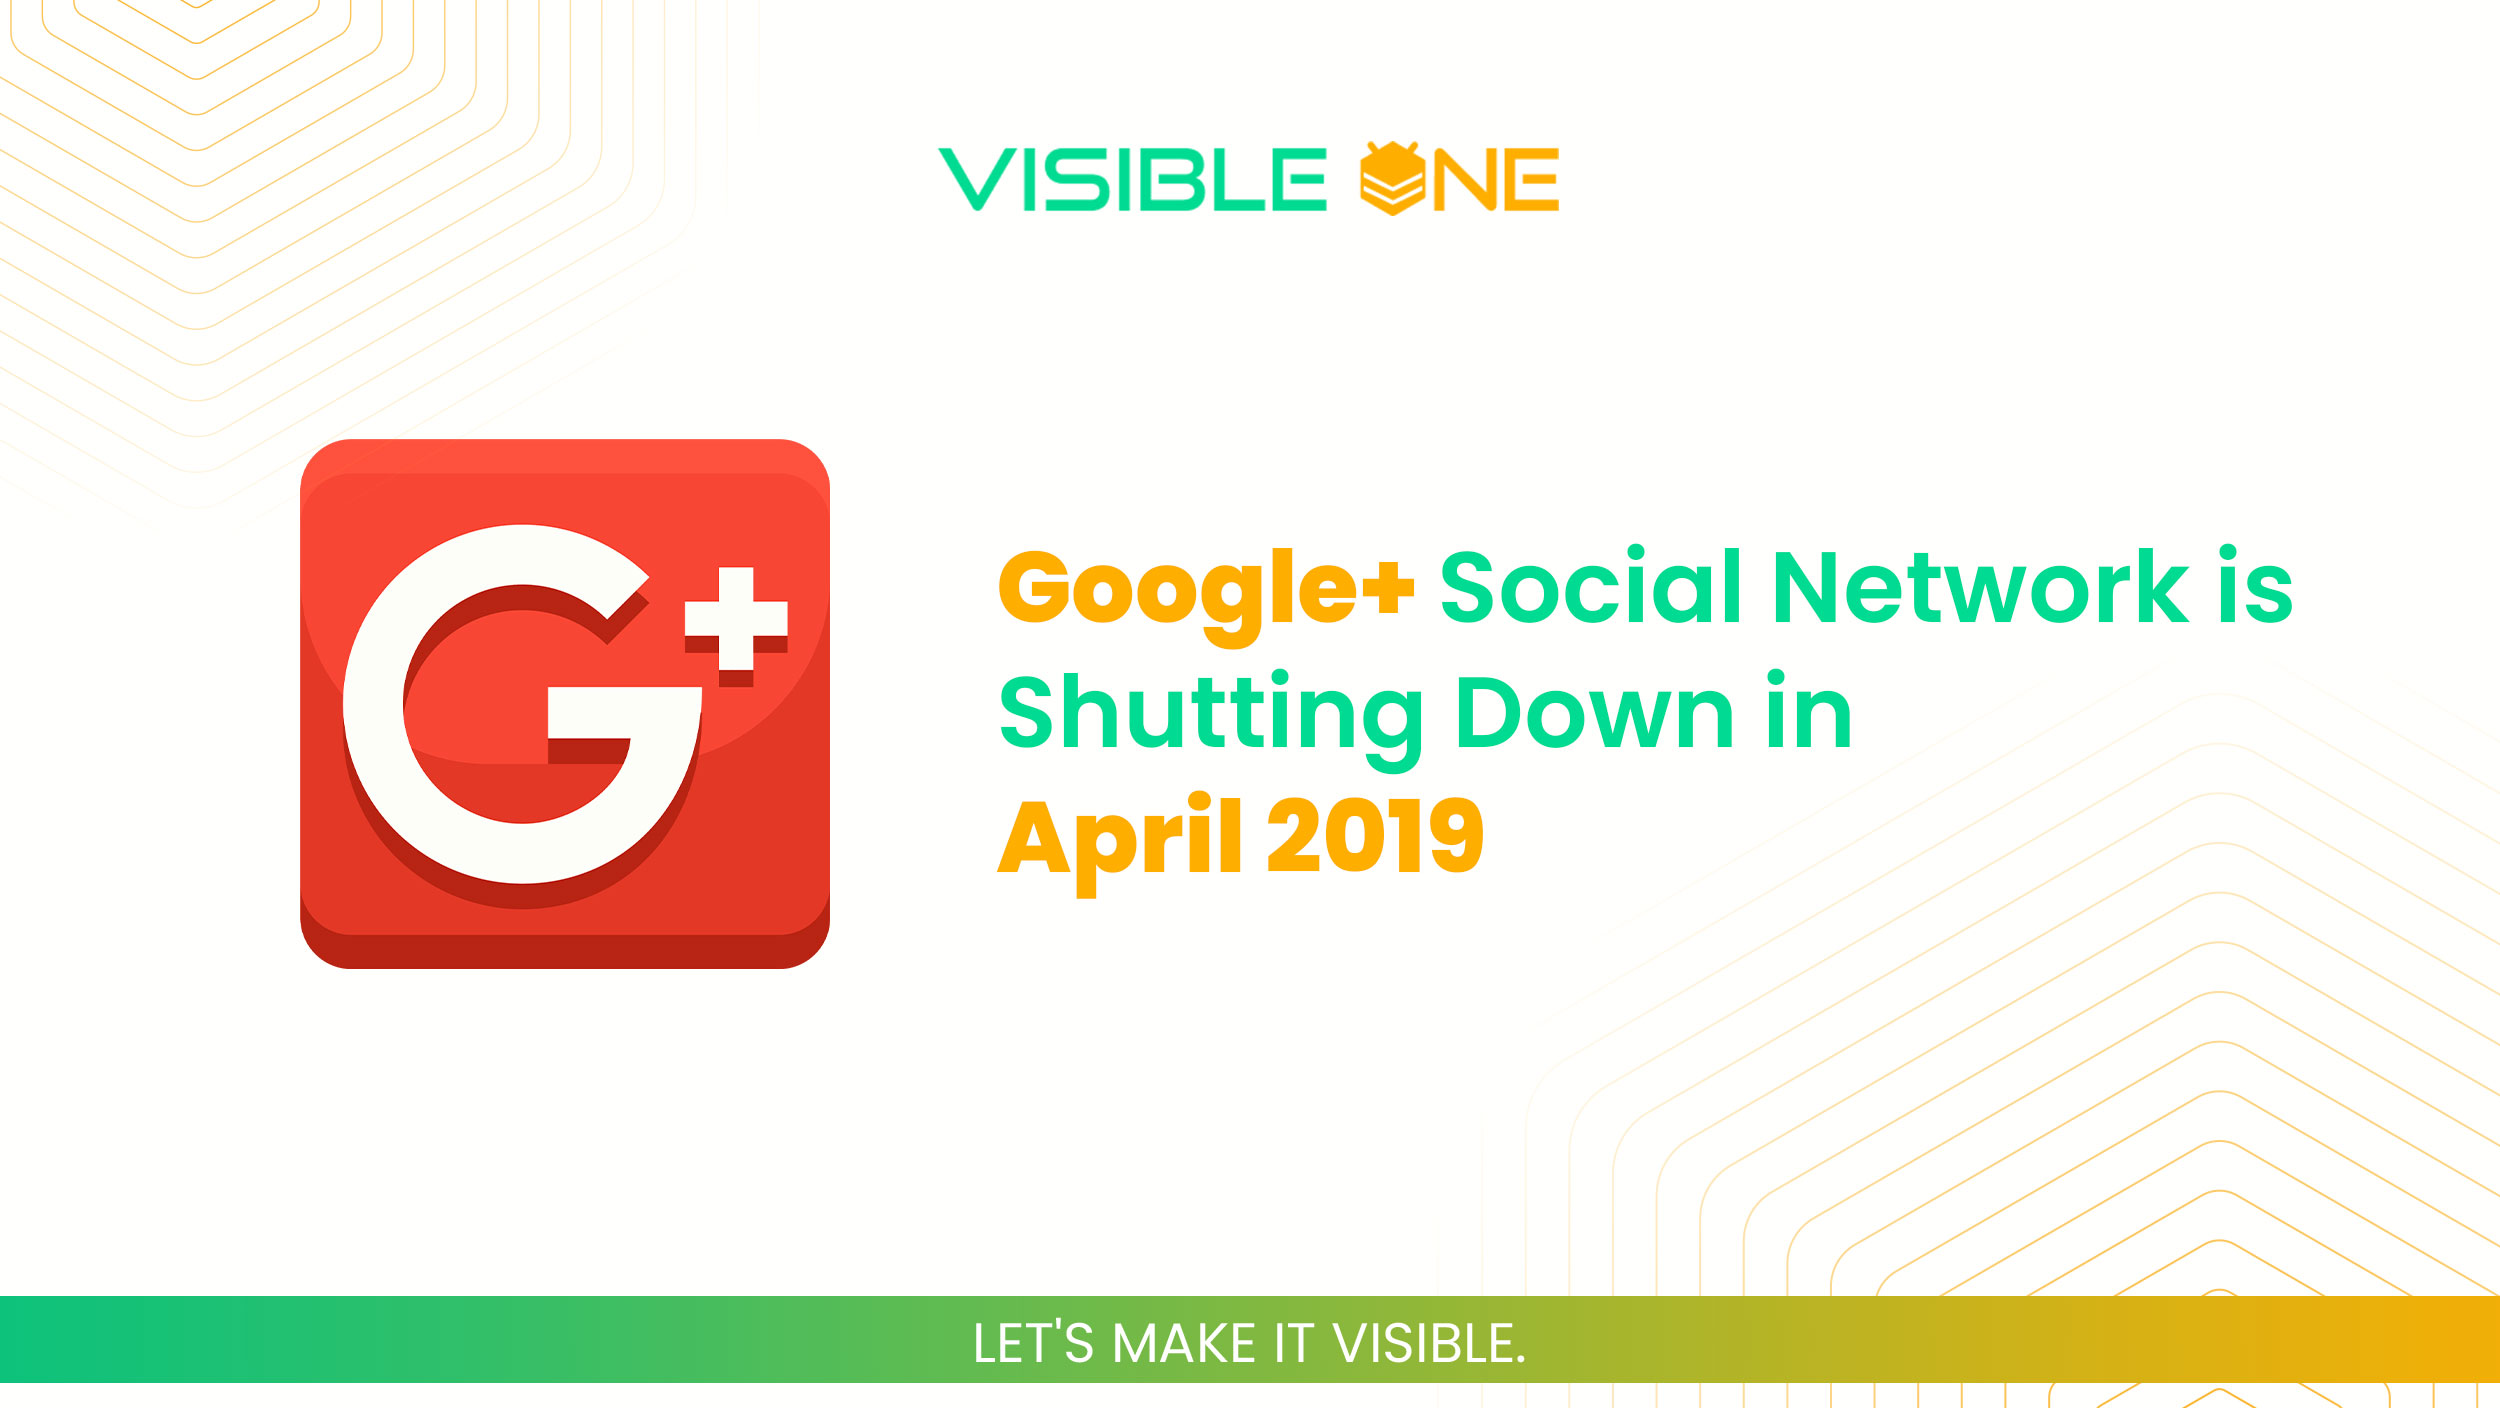 Google+ Social Network is Shutting Down in April 2019